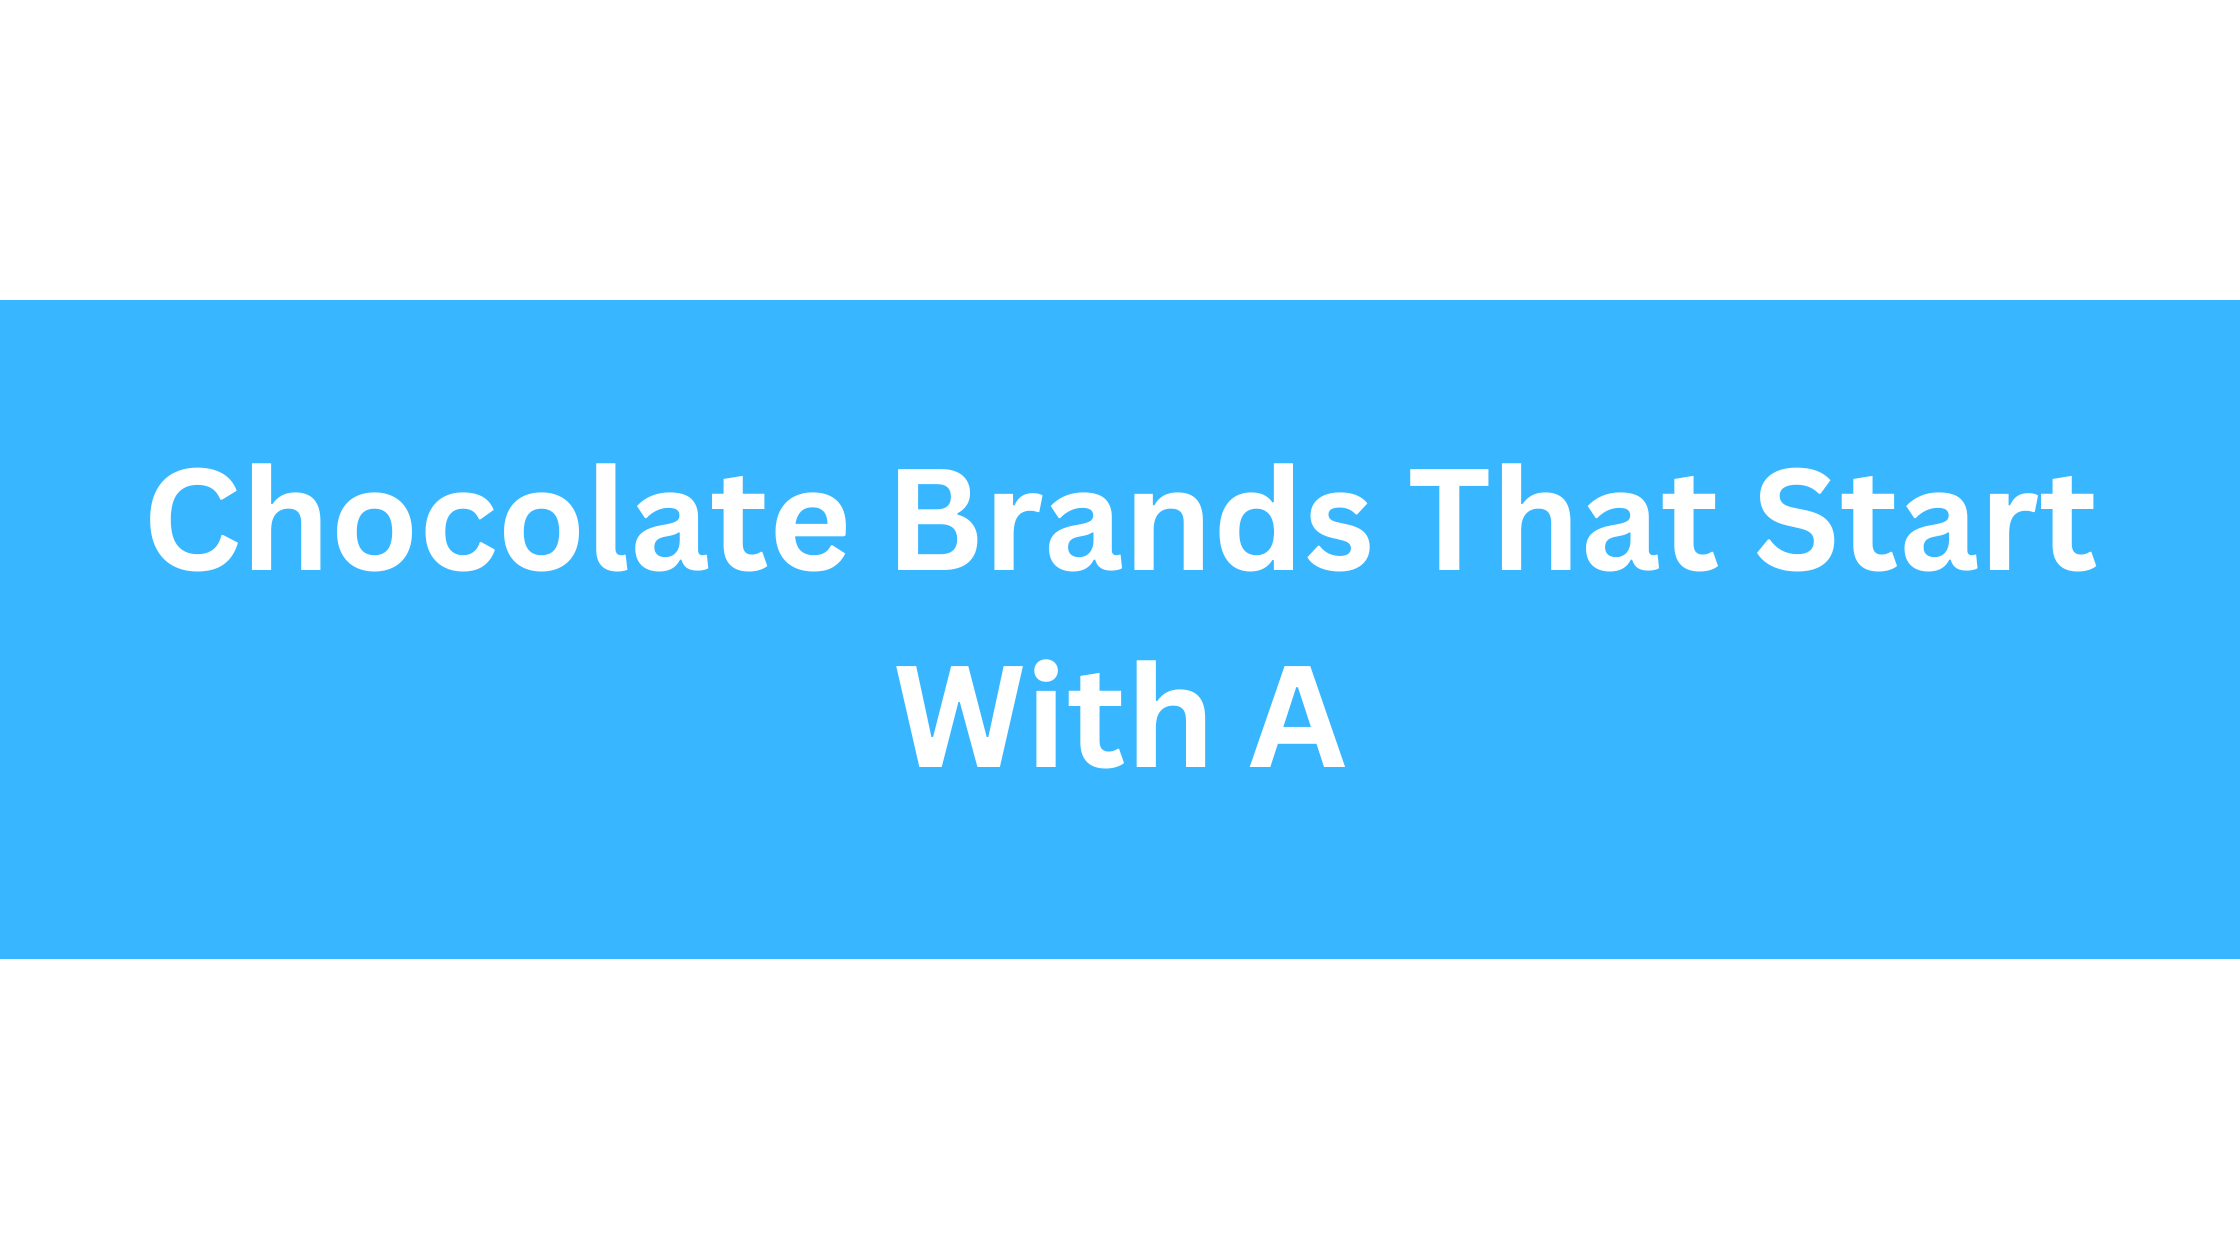 Chocolate Brands That Start With A